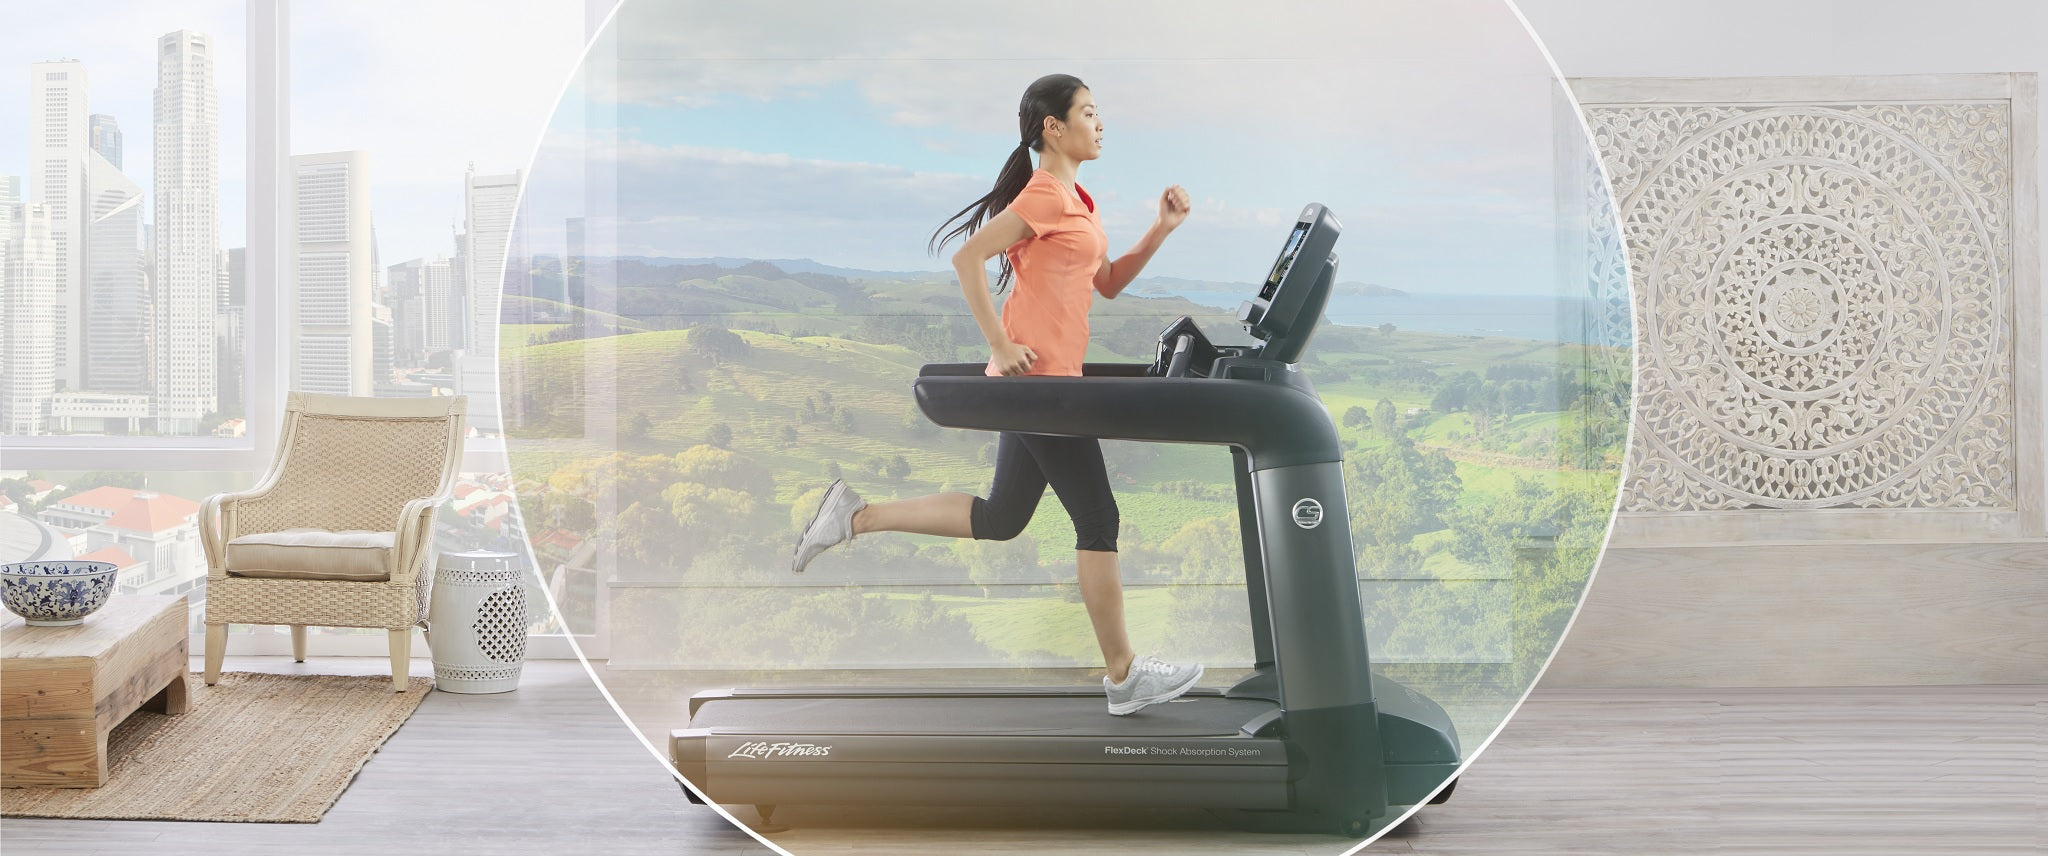 Life Fitness Sale!  Including bikes, ellipticals, treadmills and gyms.